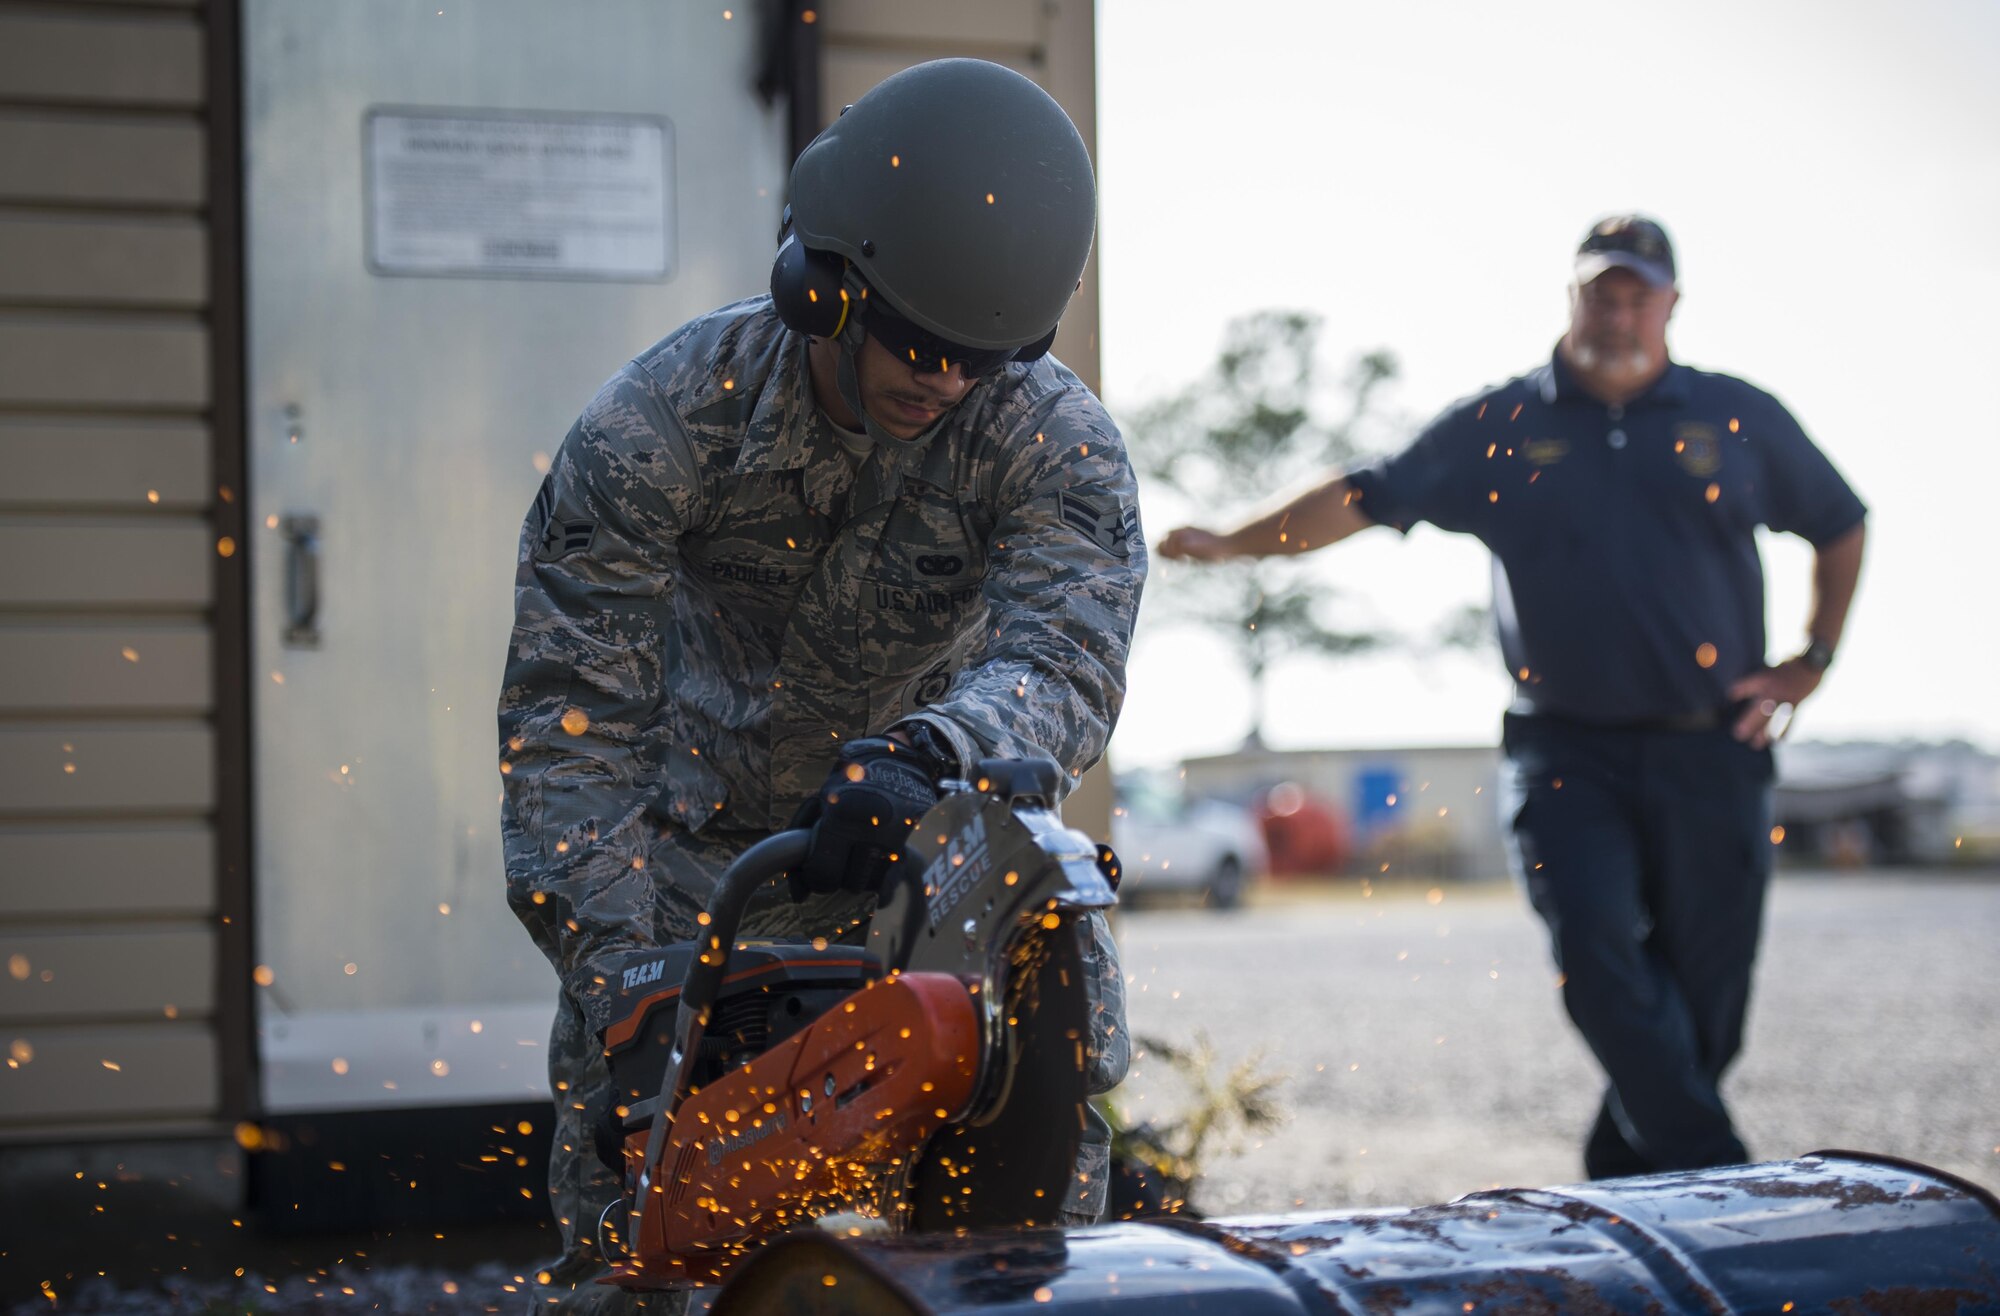 Airman 1st Class Justice Padilla, a defender with the 1st Special Operations Security Forces Squadron, uses a power cutter to cut through a metal drum at Hurlburt Field, Fla., Dec. 13, 2016. Air Commandos participated in power tool training to enhance real-world emergency response capabilities to ensure global readiness. (U.S. Air Force photos by Airman 1st Class Joseph Pick)